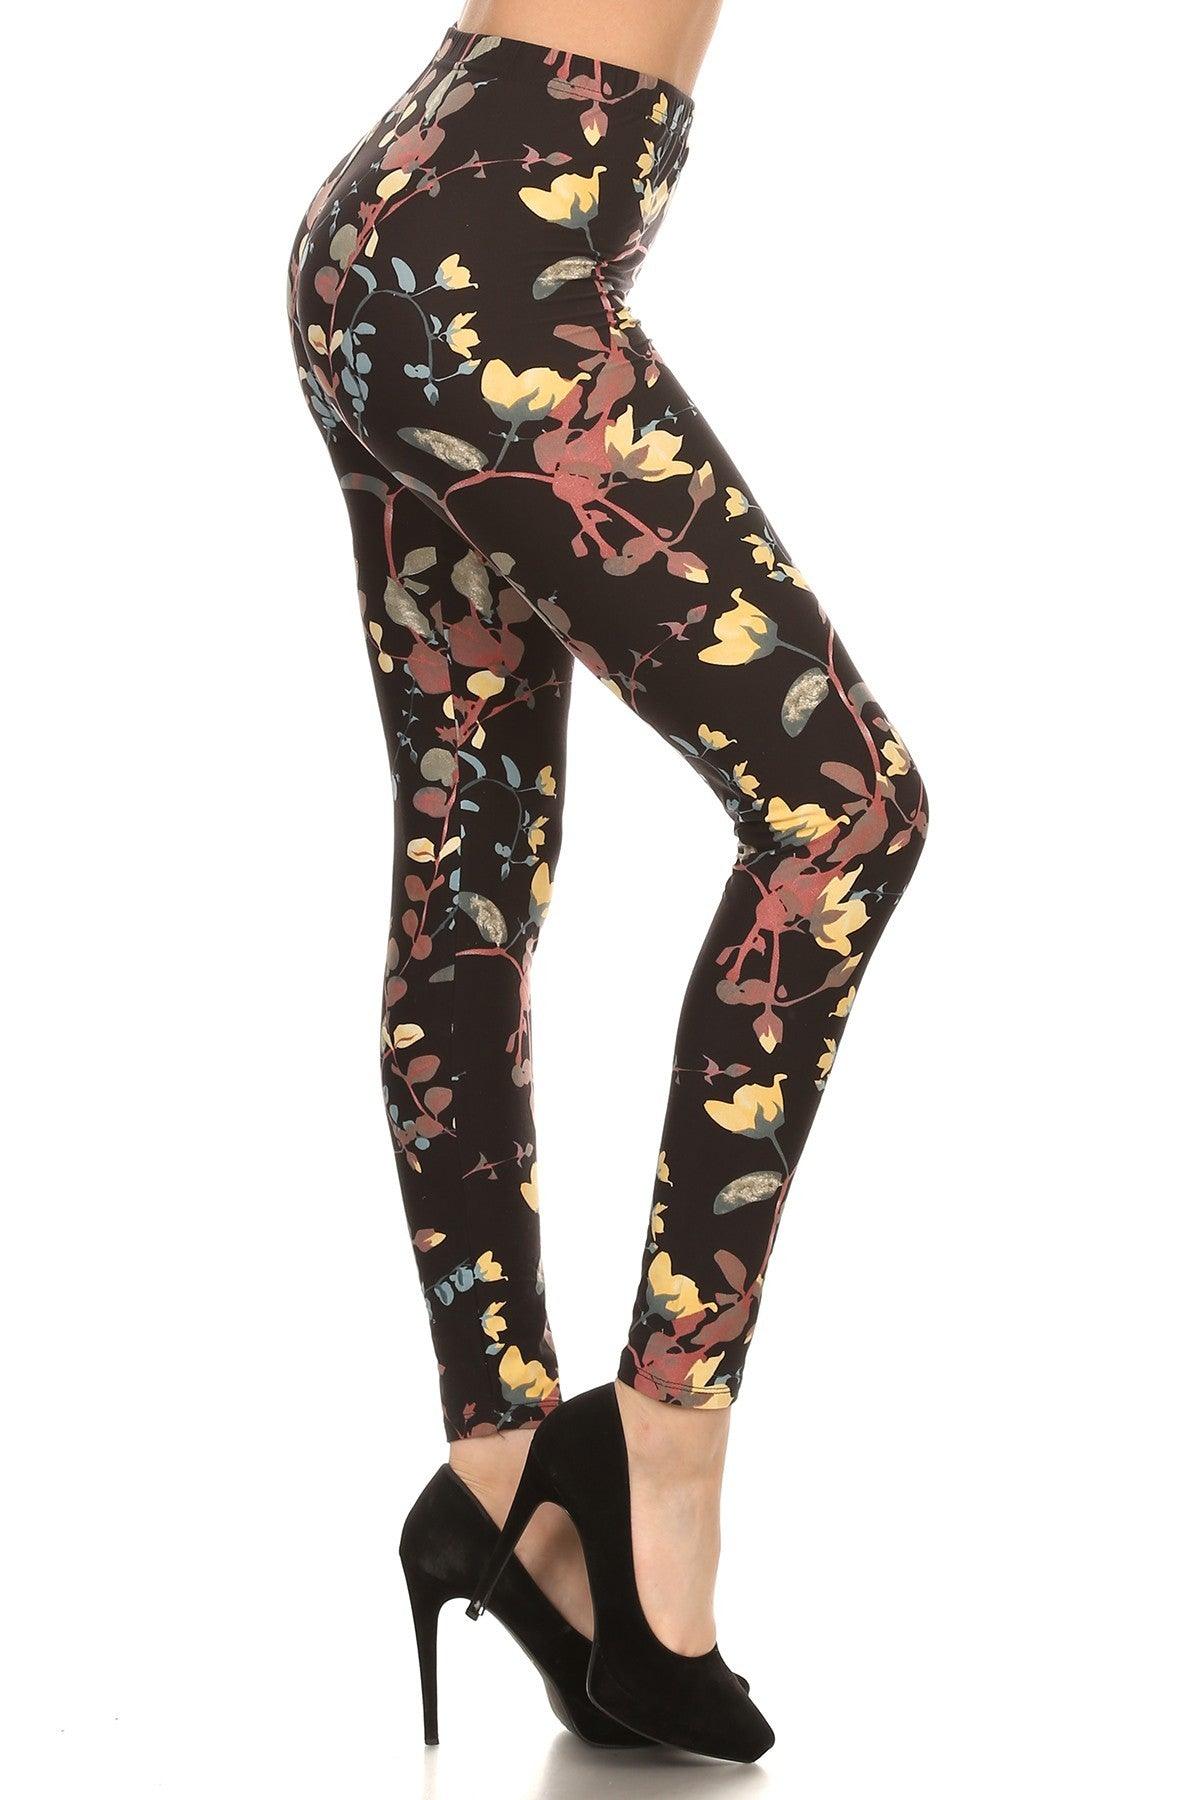 Vine Printed High Waisted Knit Leggings In Skinny Fit With Elastic Waistband - sneakerhypesusa